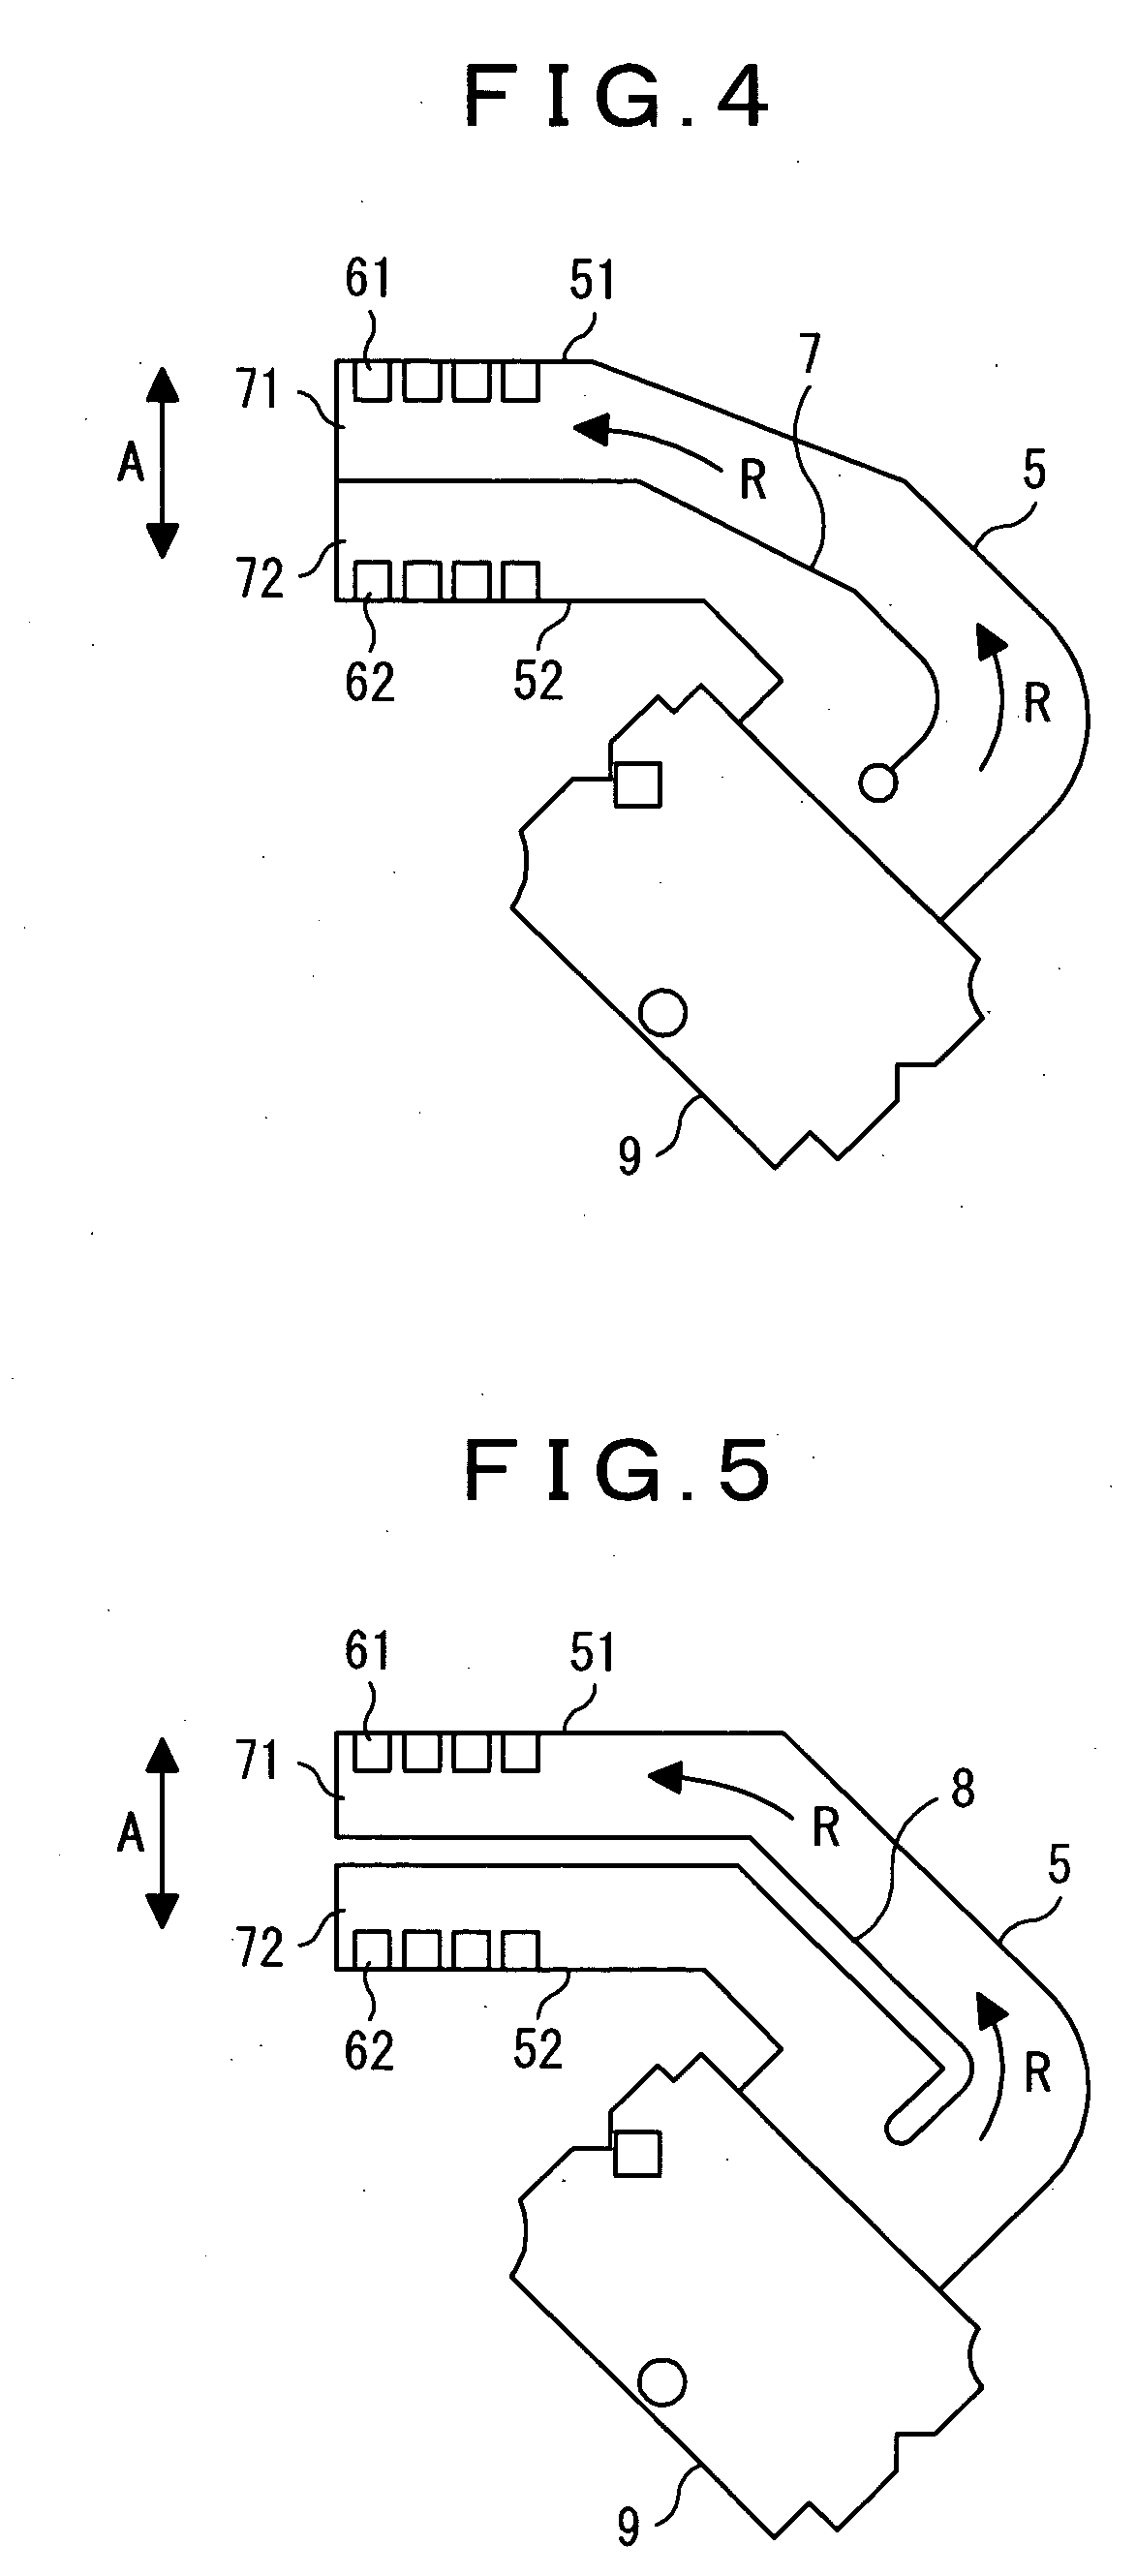 Connection structure of flexible substrate